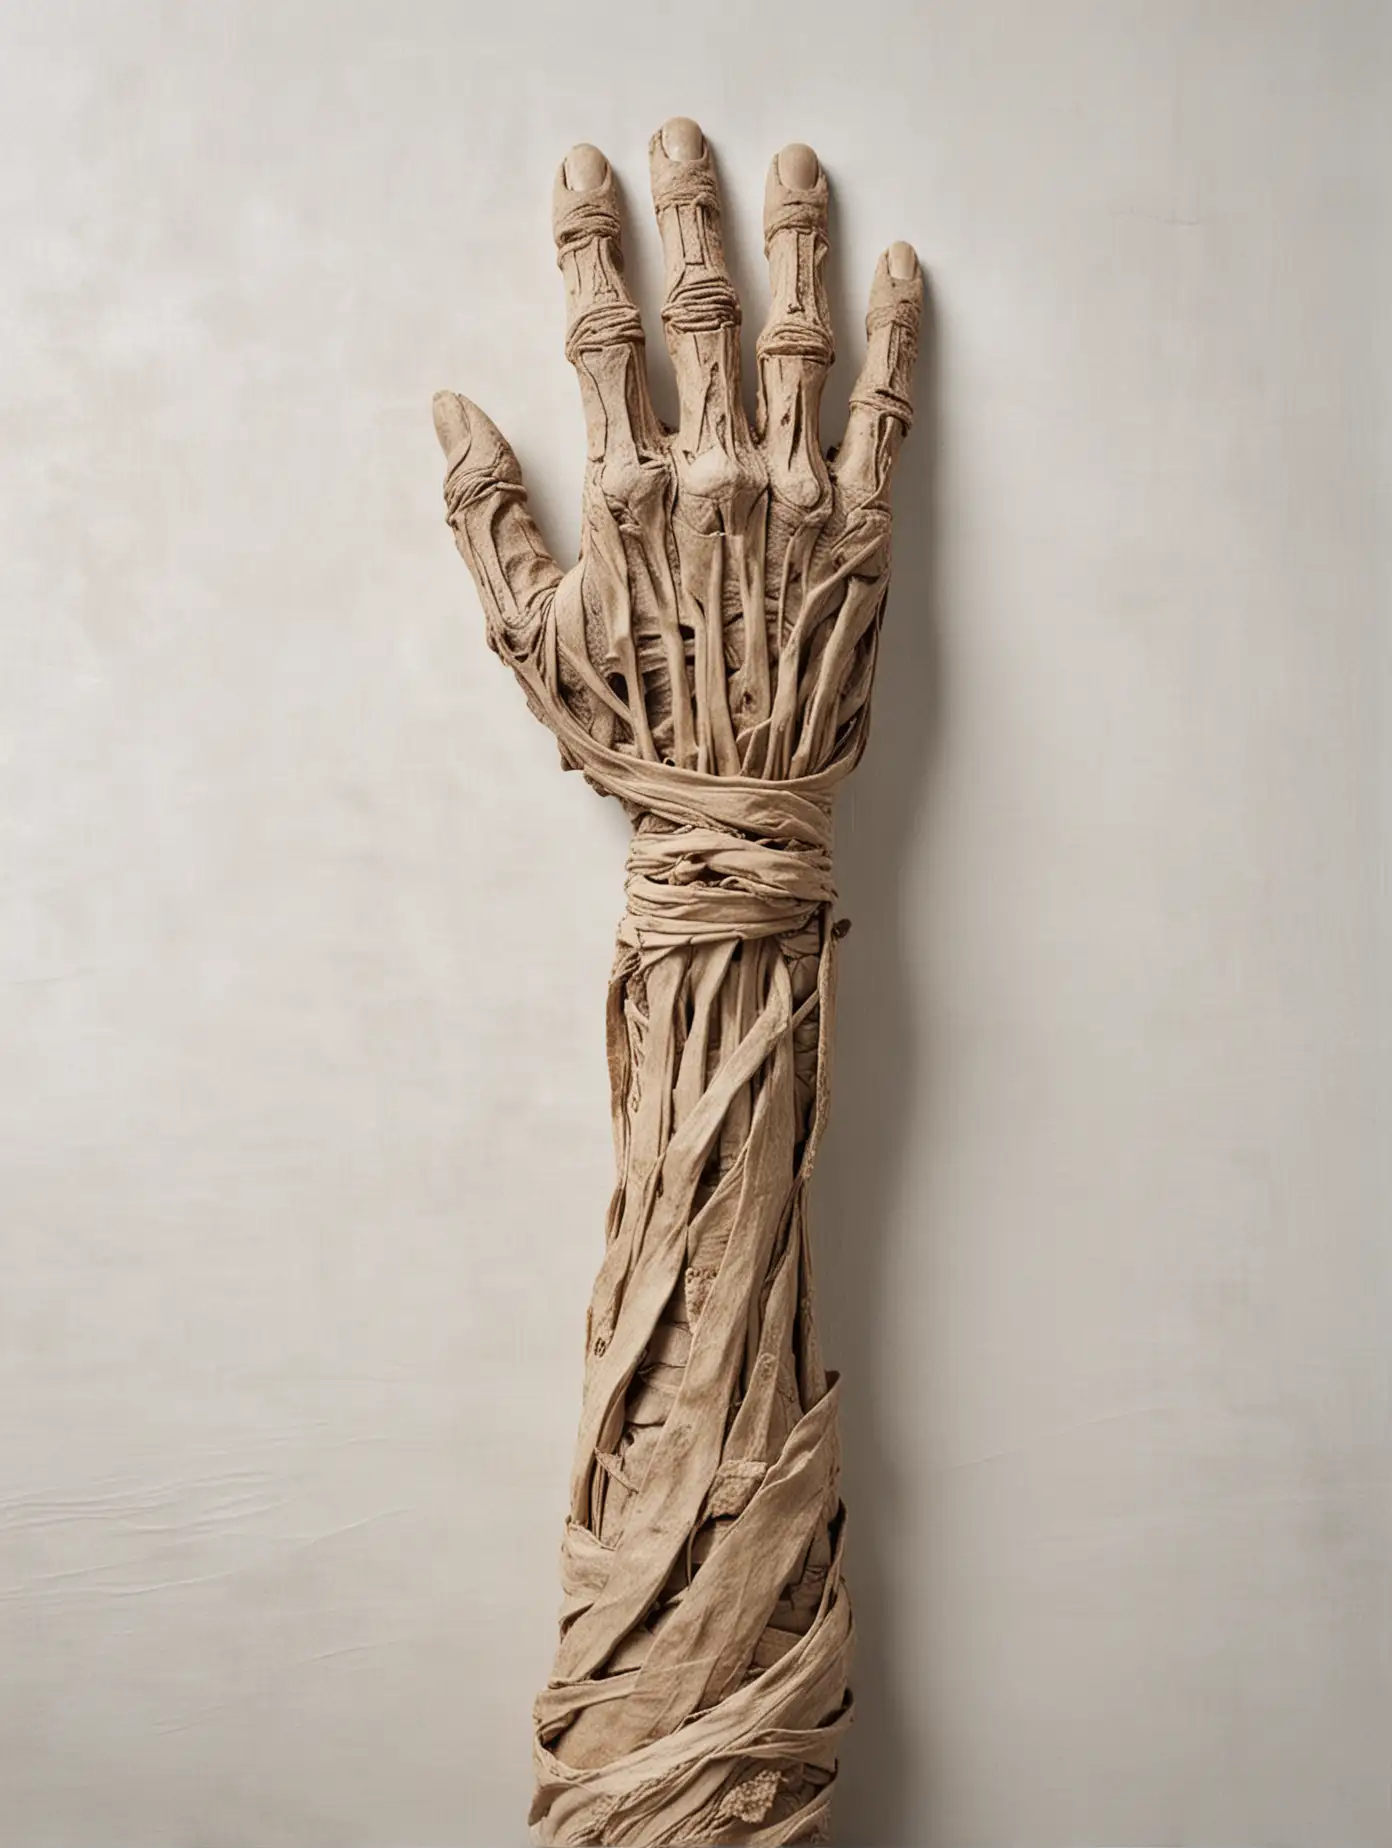 Eerie Mummified Hand and Forearm on White Sheet